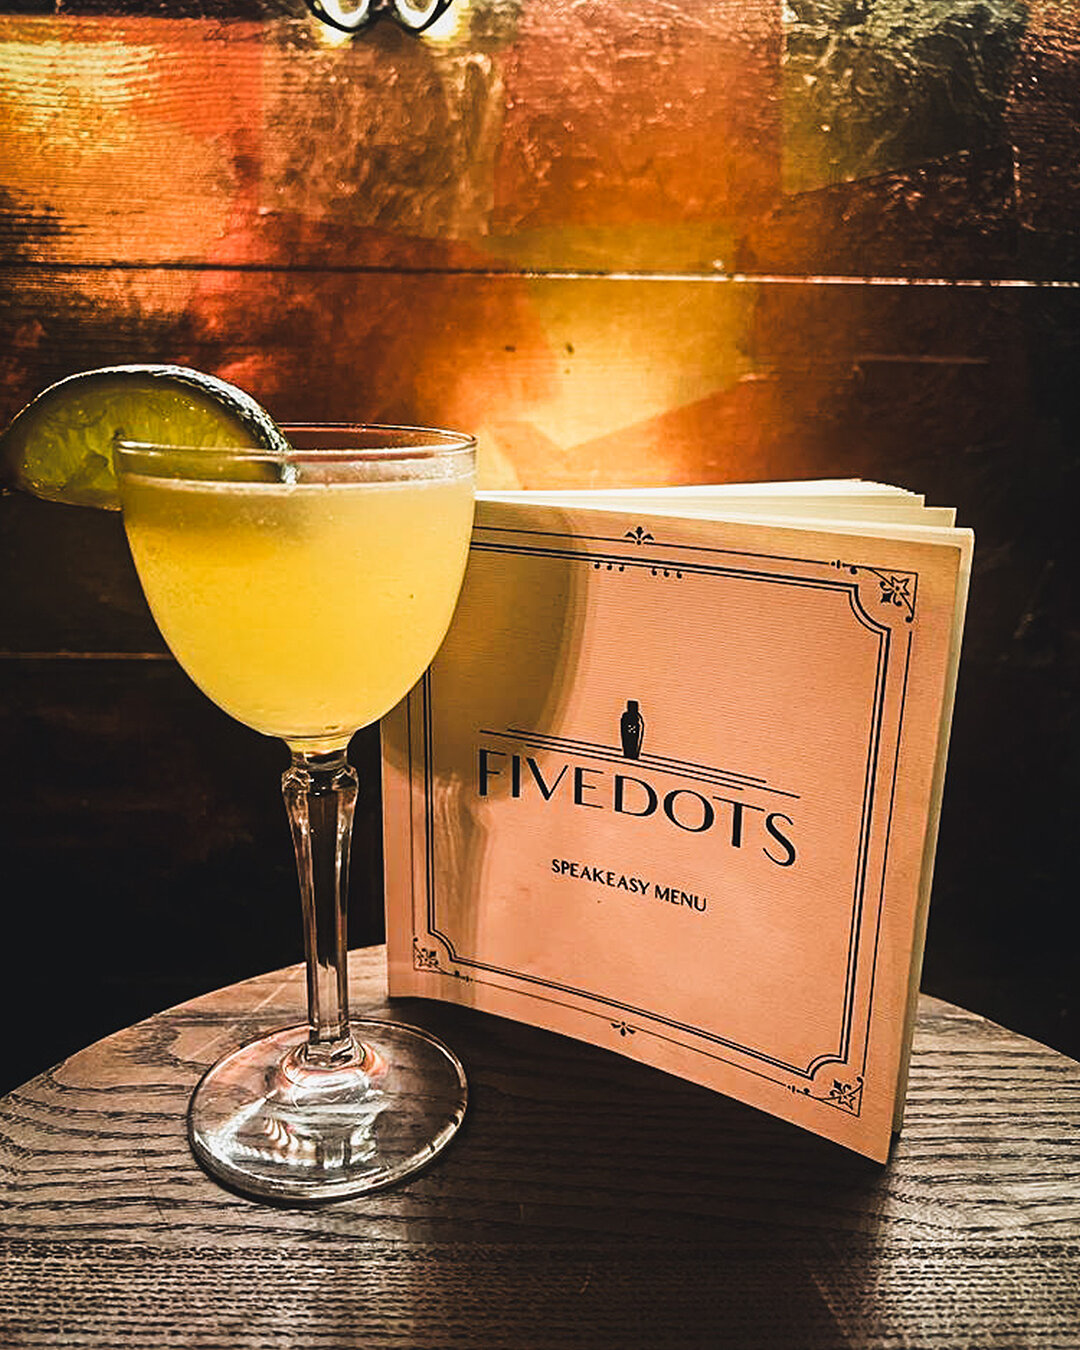 💀 Corpse Reviver No.2 💀

This classic, prohibition-era drink was adapted from Harry Craddock's 1930s publication - The Savoy Cocktail Book 📖

@beefeatergin London Dry Gin, Orange Curaco, @lillet Blanc, lemon and a dash of Absinthe.

.
.
.

#worthi